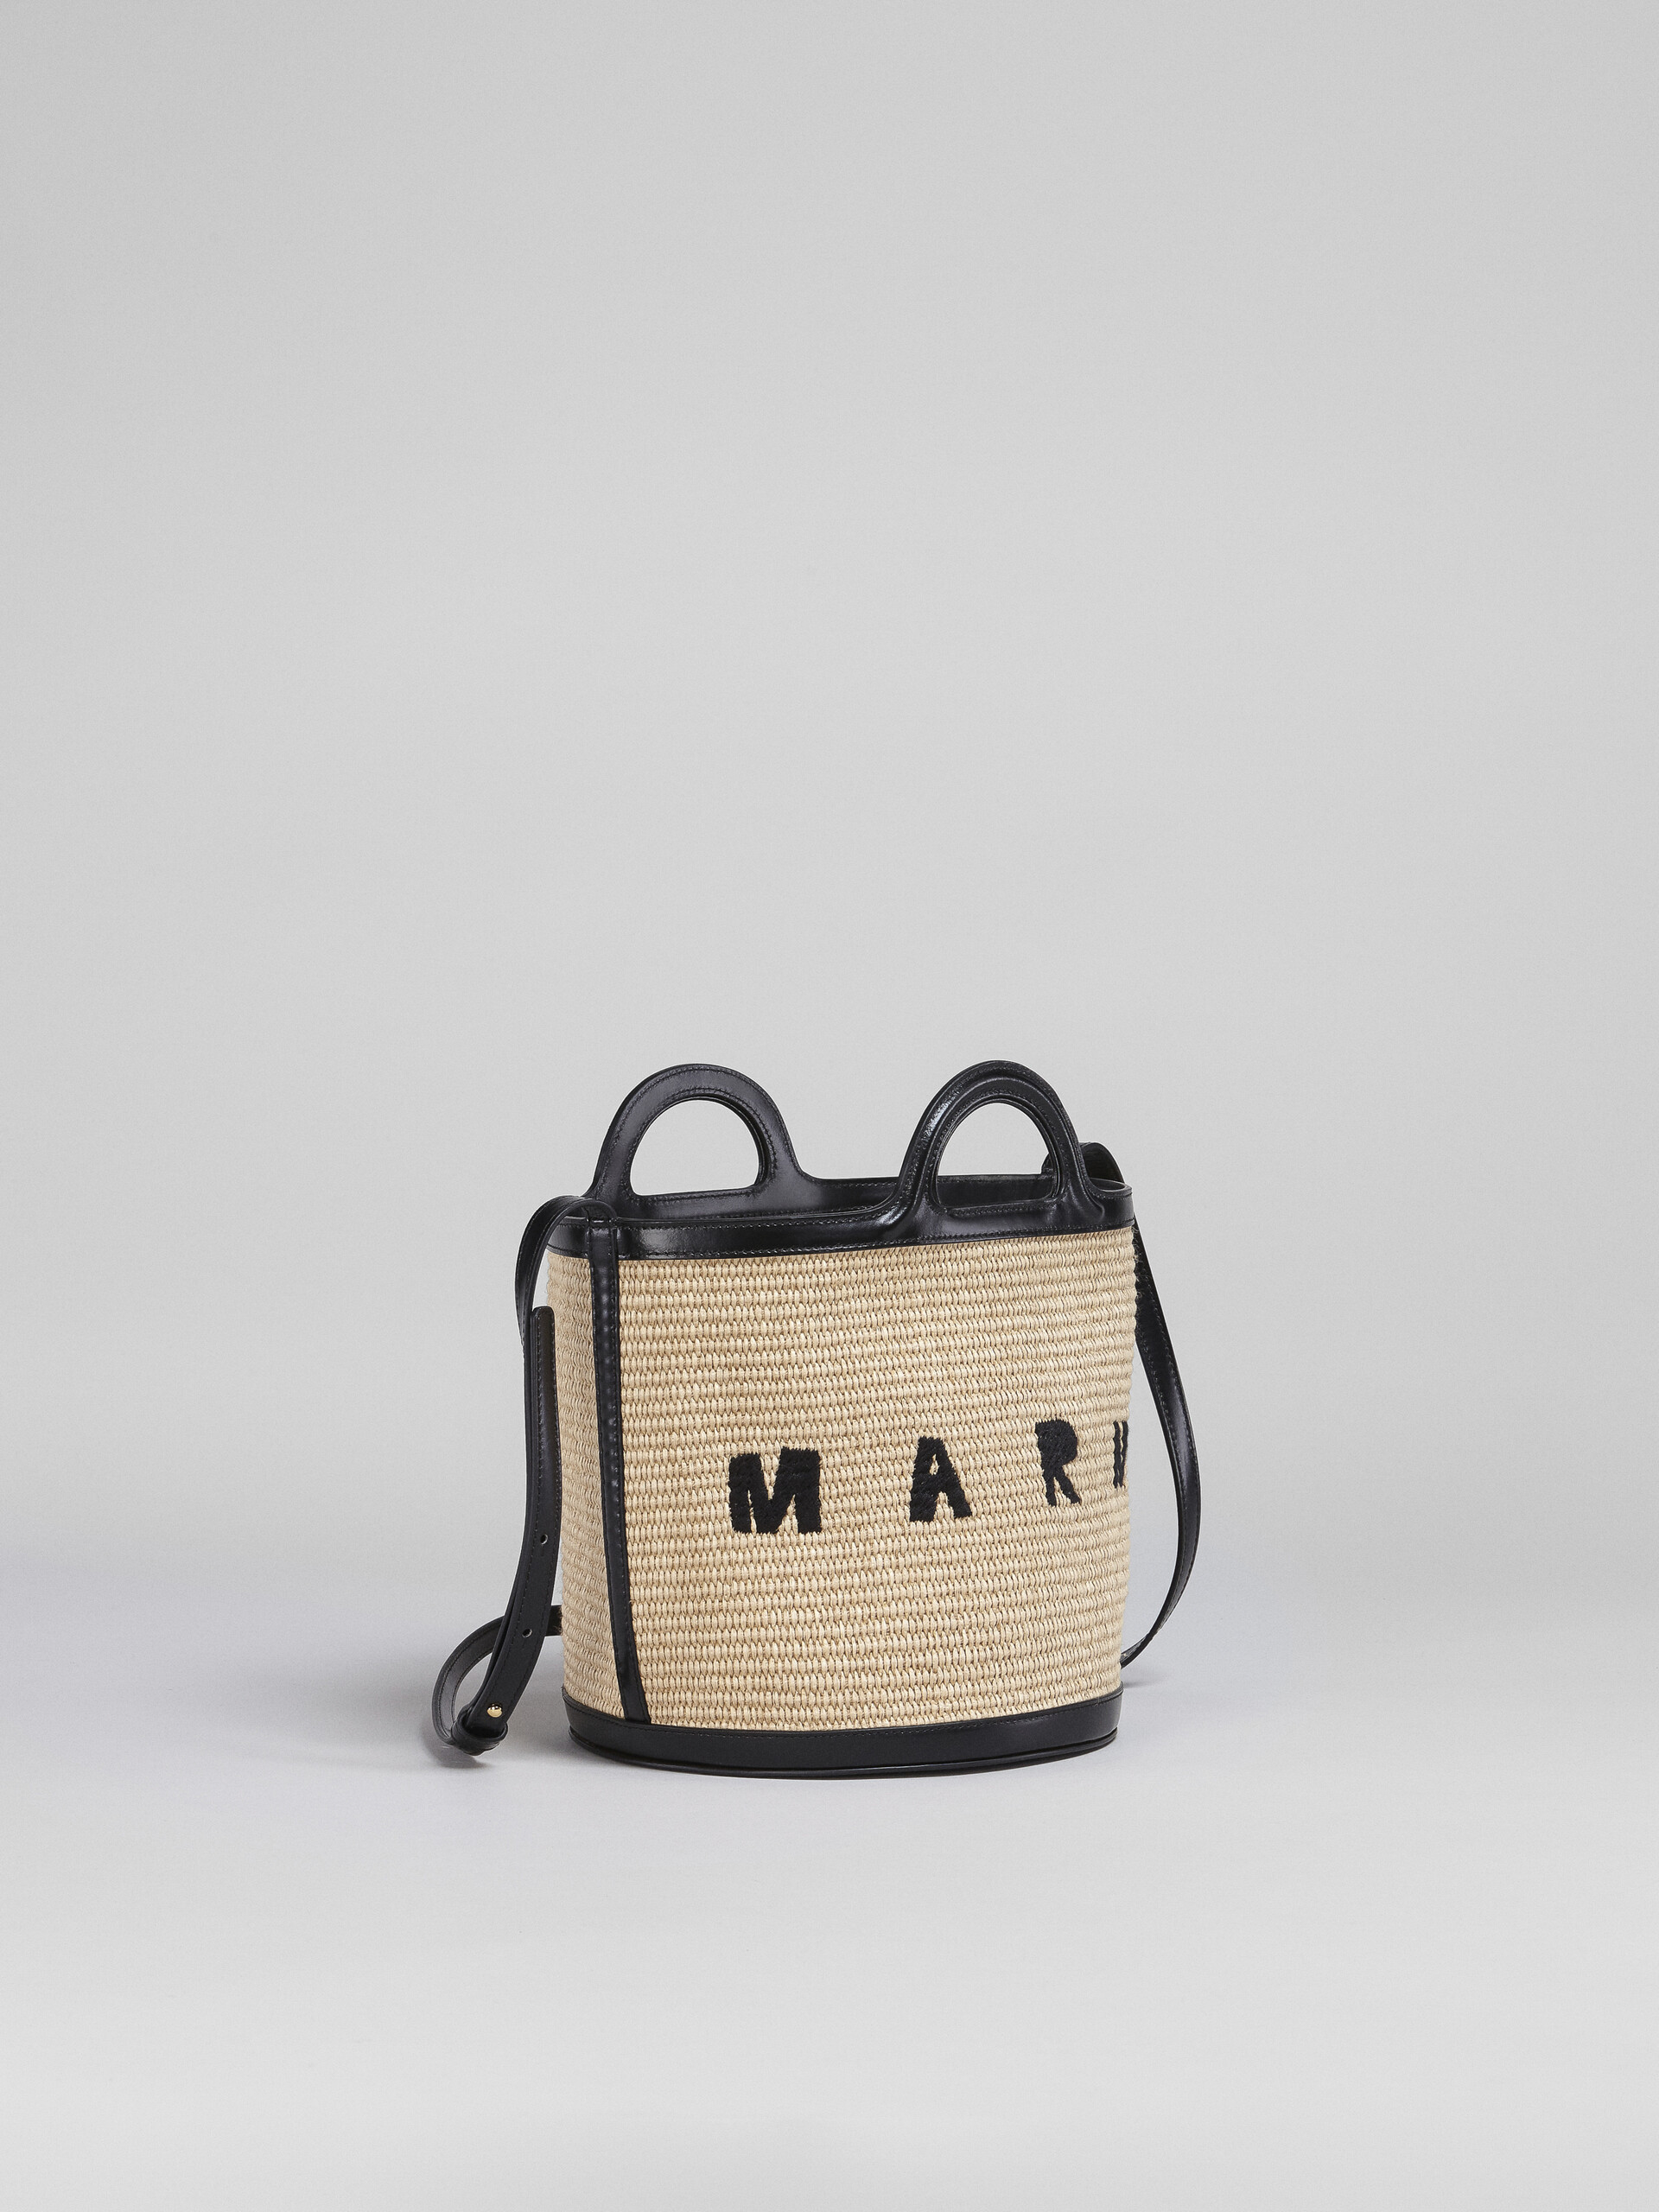 TROPICALIA small bucket bag  in black leather and raffia - Shoulder Bags - Image 6